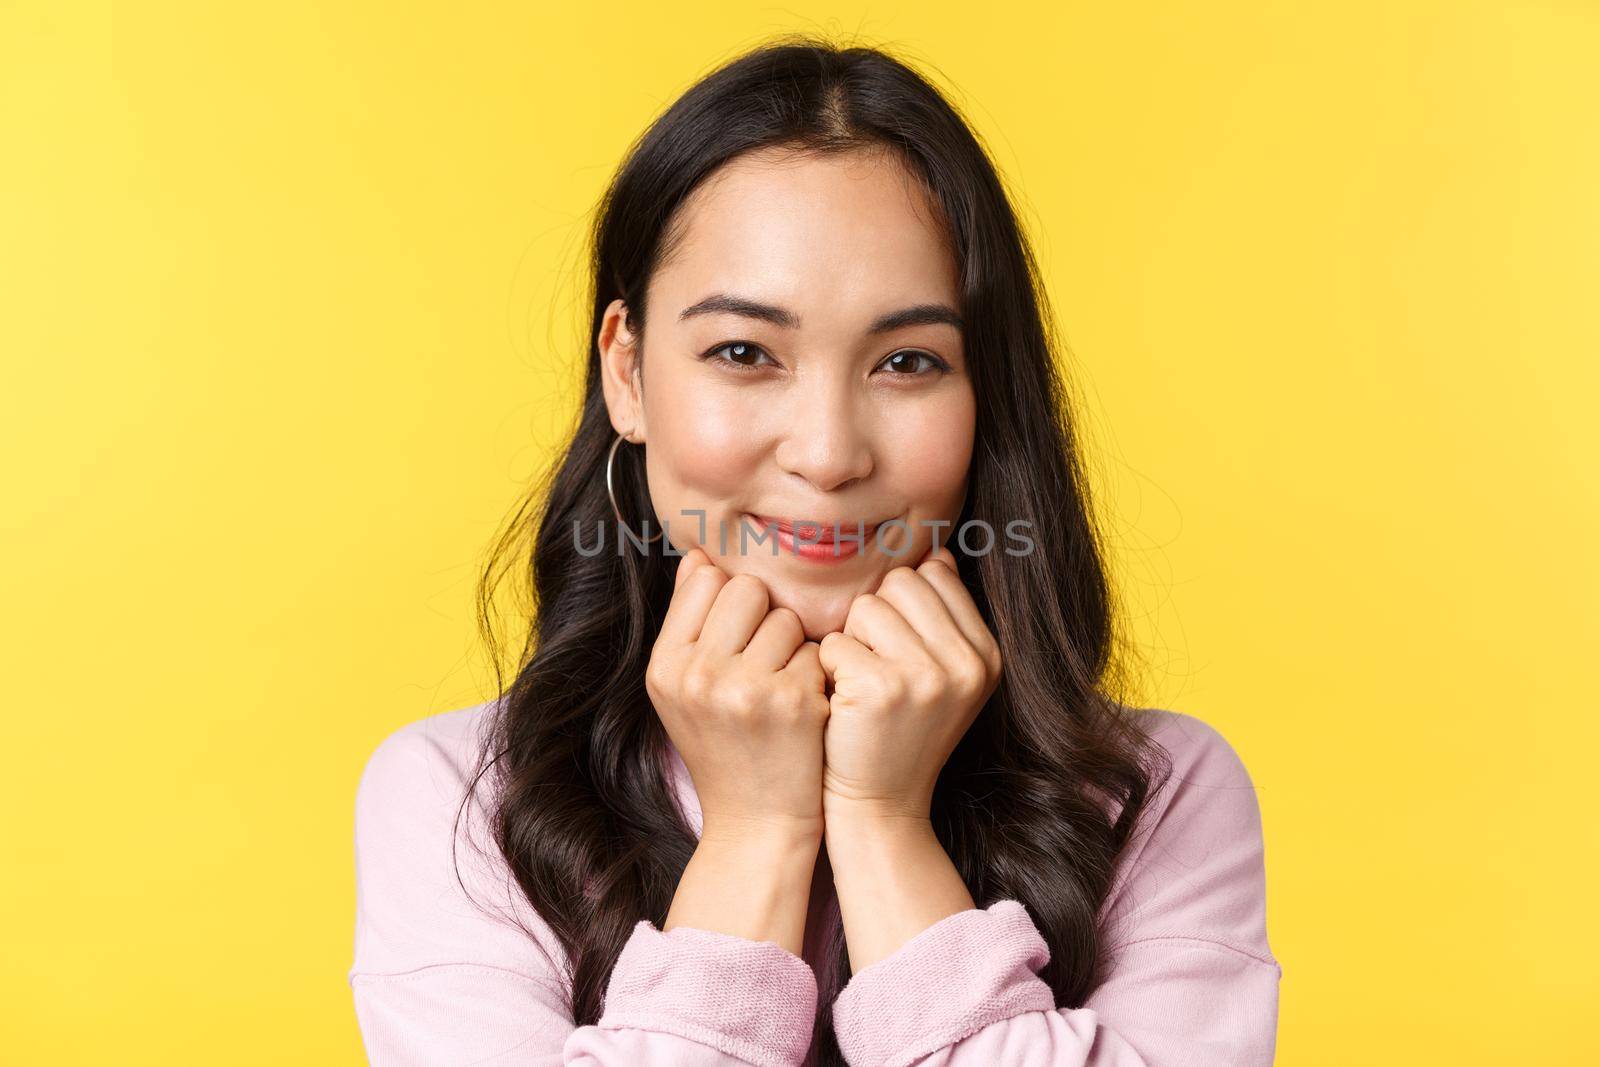 People emotions, lifestyle leisure and beauty concept. Lovely asian woman smiling at camera and looking sympathy, affection, feeling joy and love, advertise shop, stand yellow background.